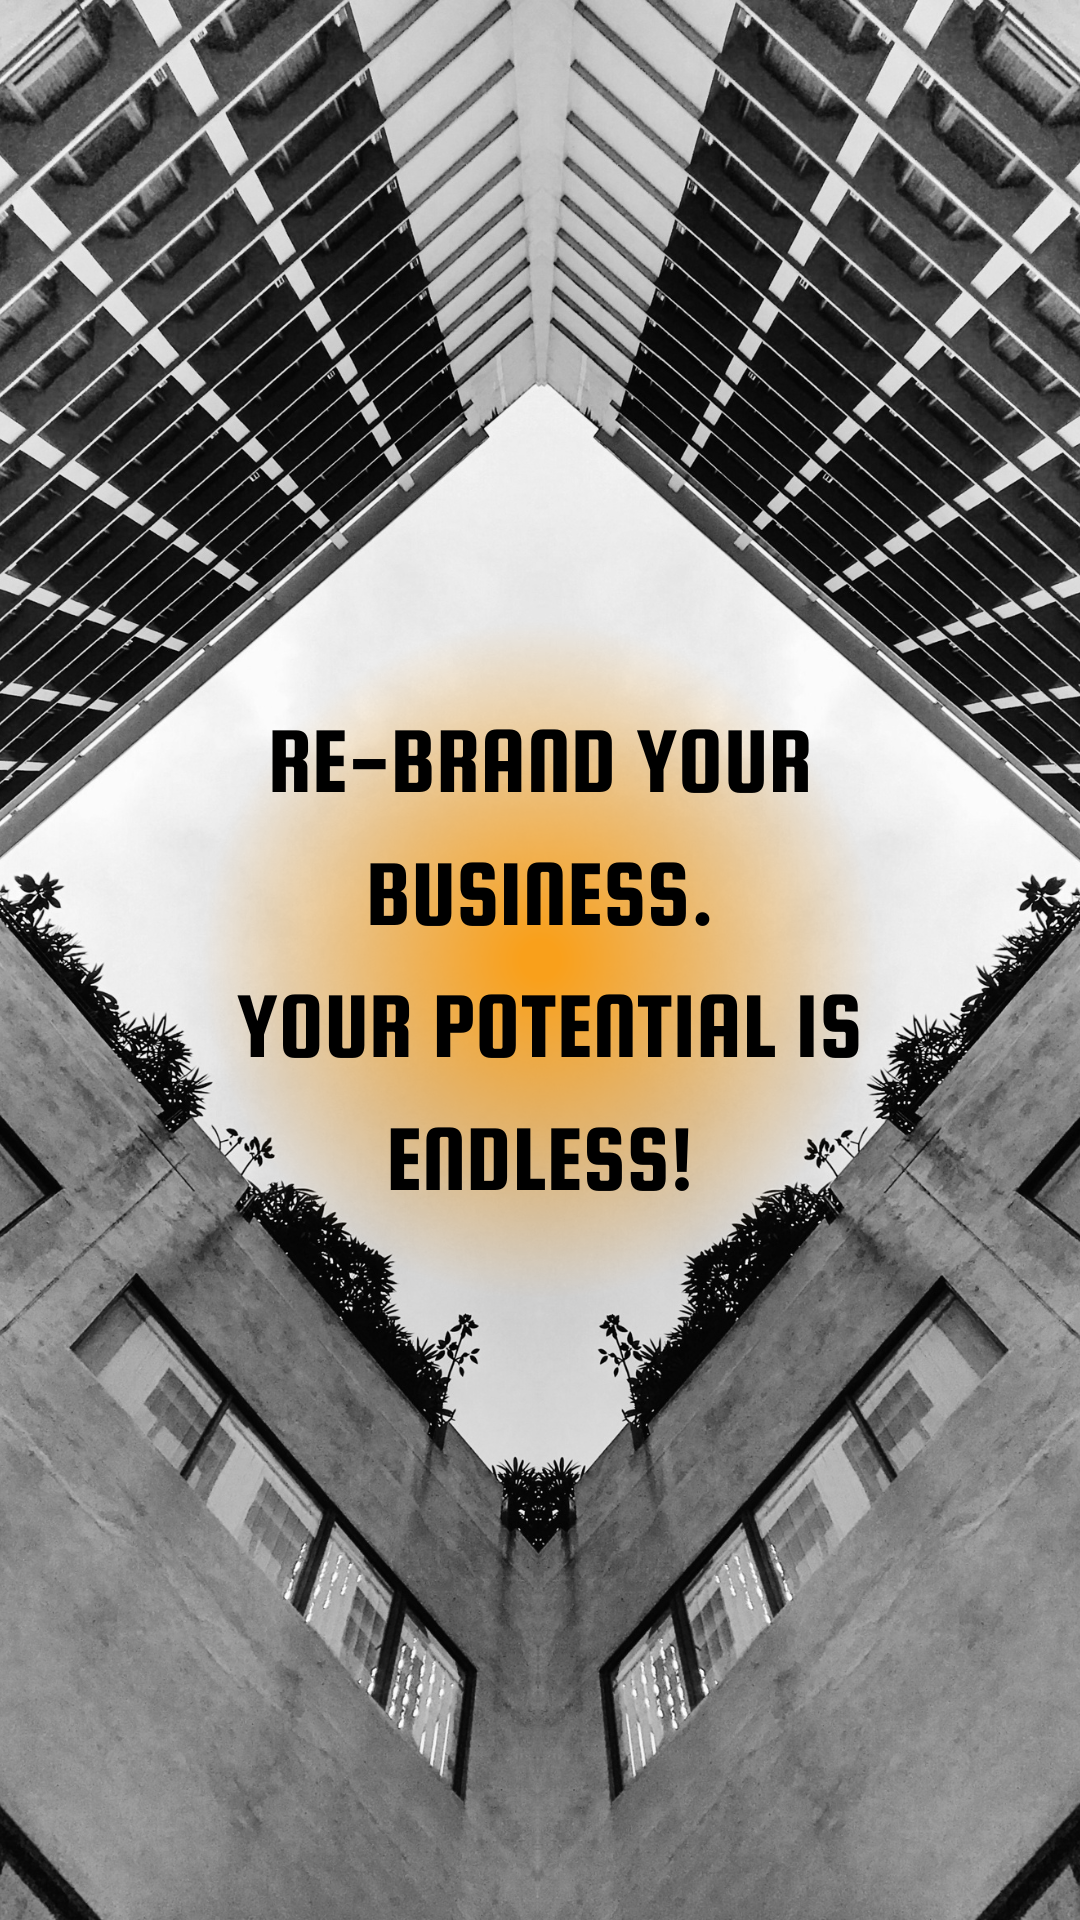 Re-brand your business 